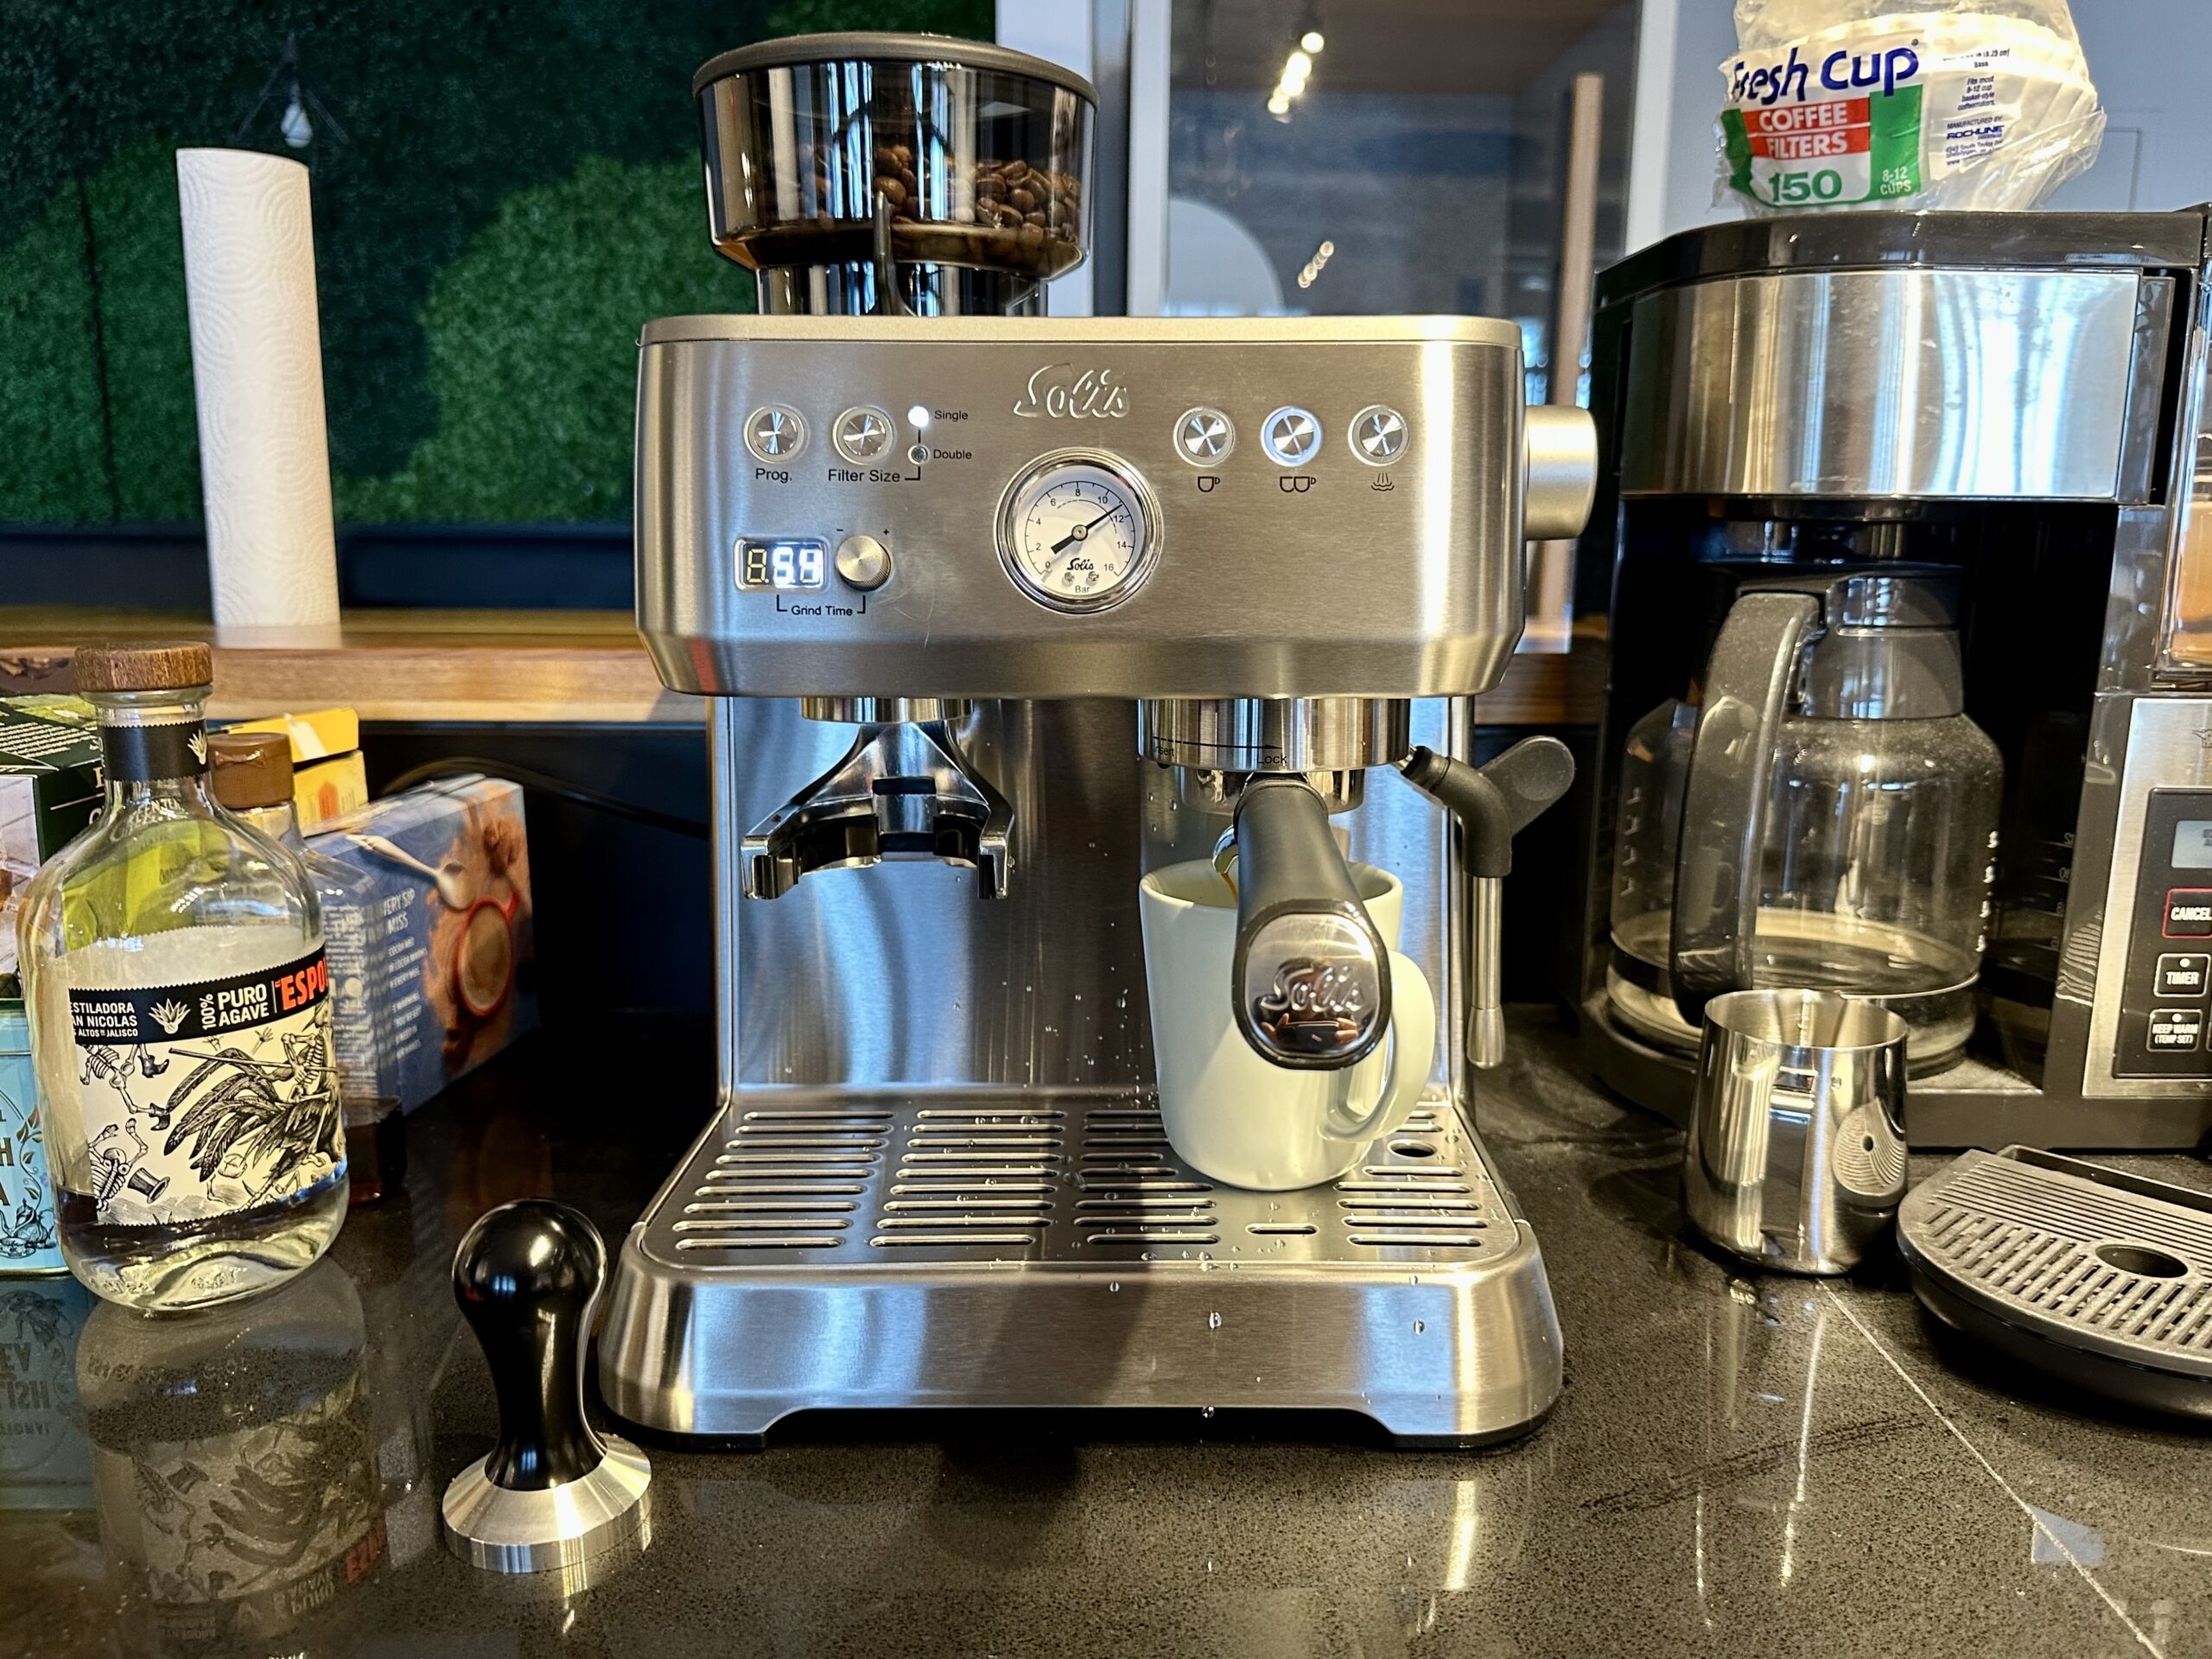 Solis makes one of the best home espresso machines if you're looking for a timesaver.